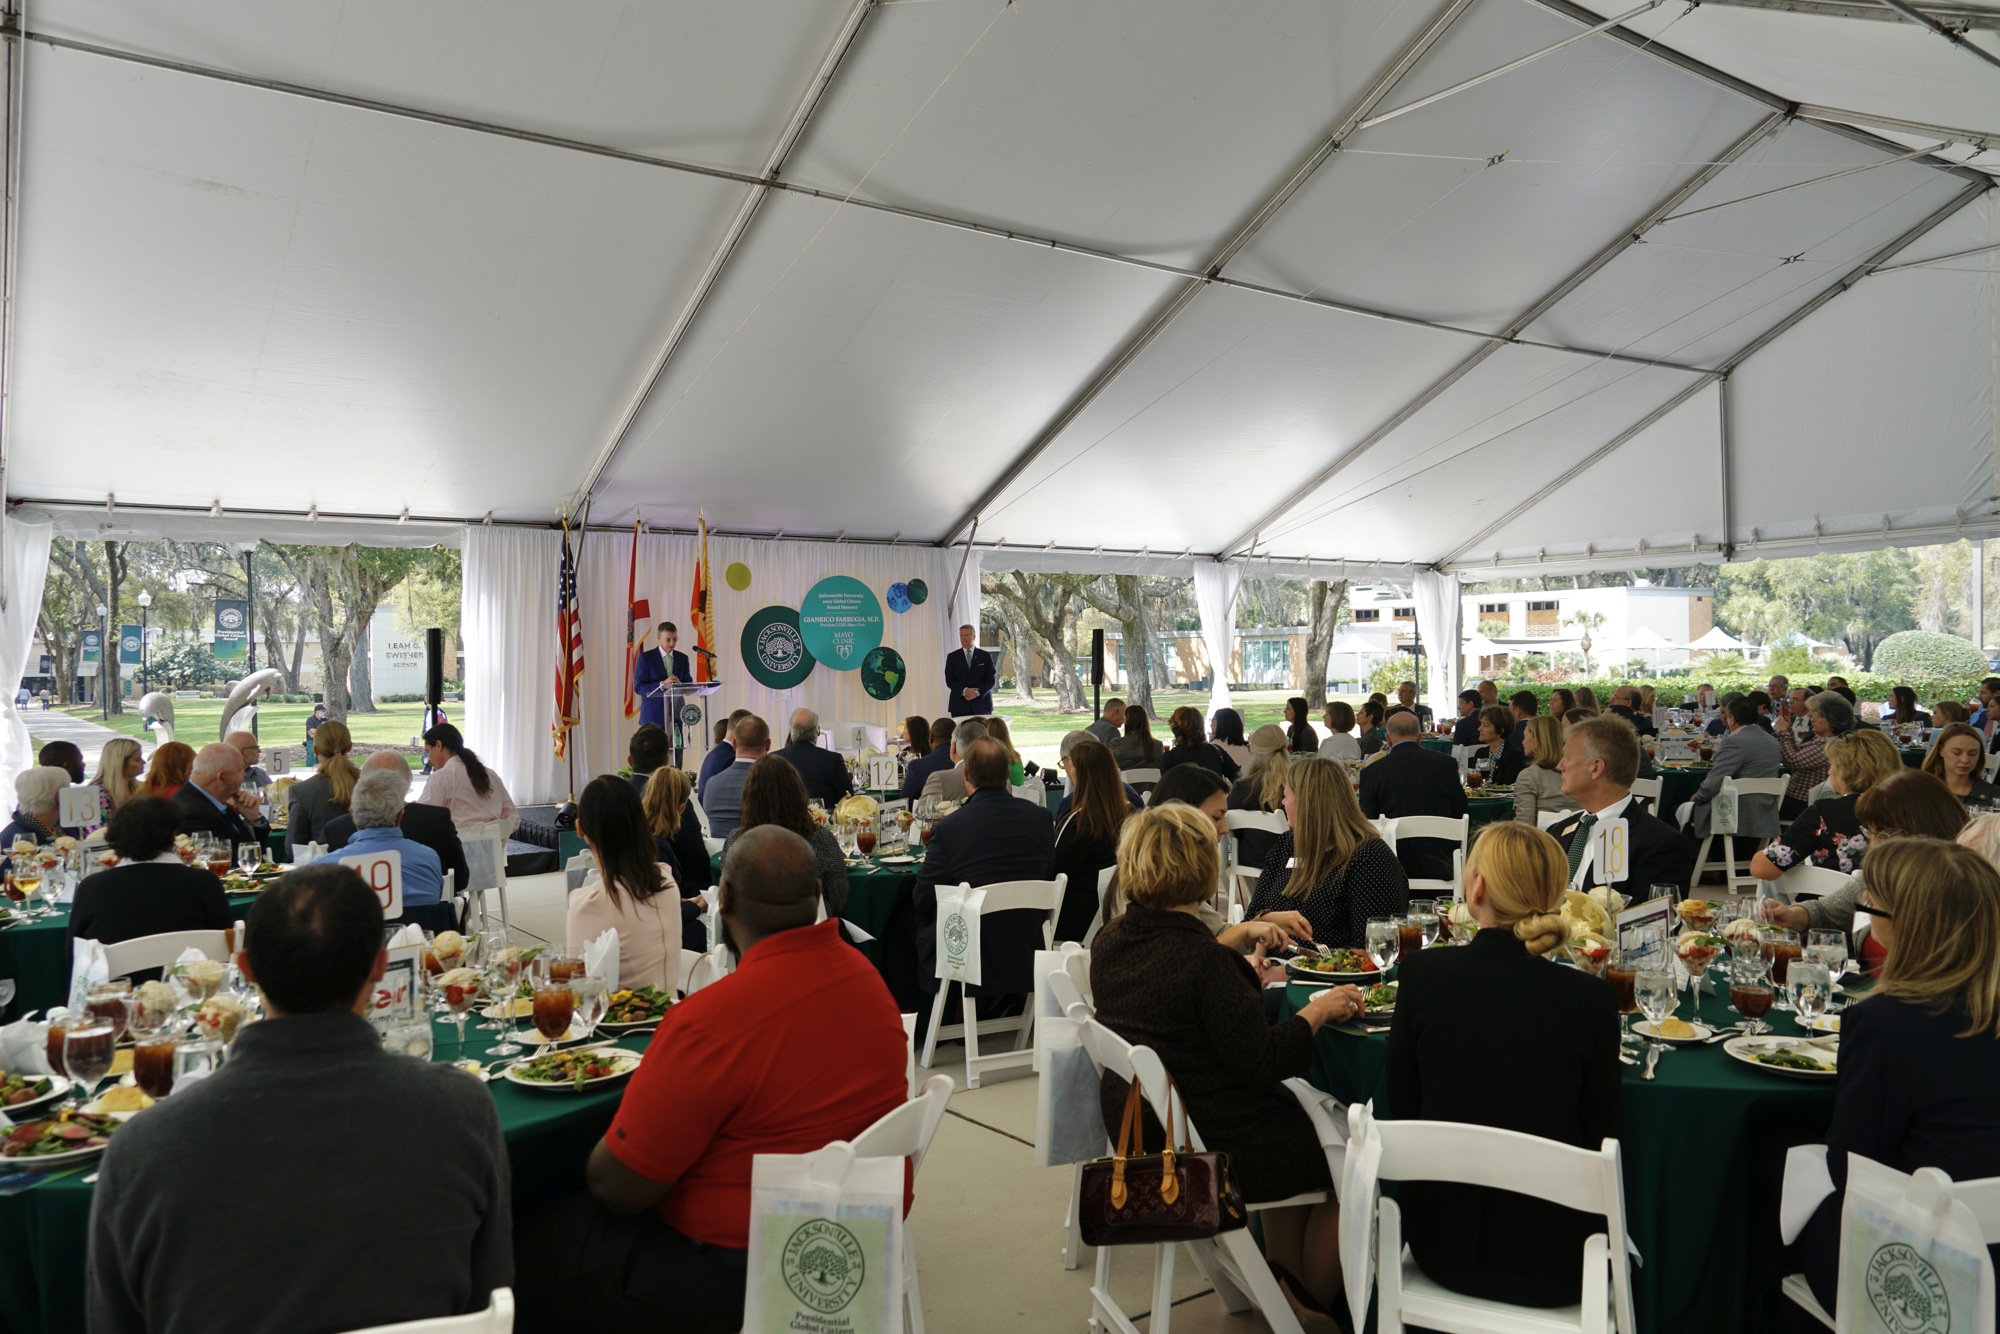 The event was March 3 at Jacksonville University's Arlington riverfront campus at 2800 University Blvd. N.